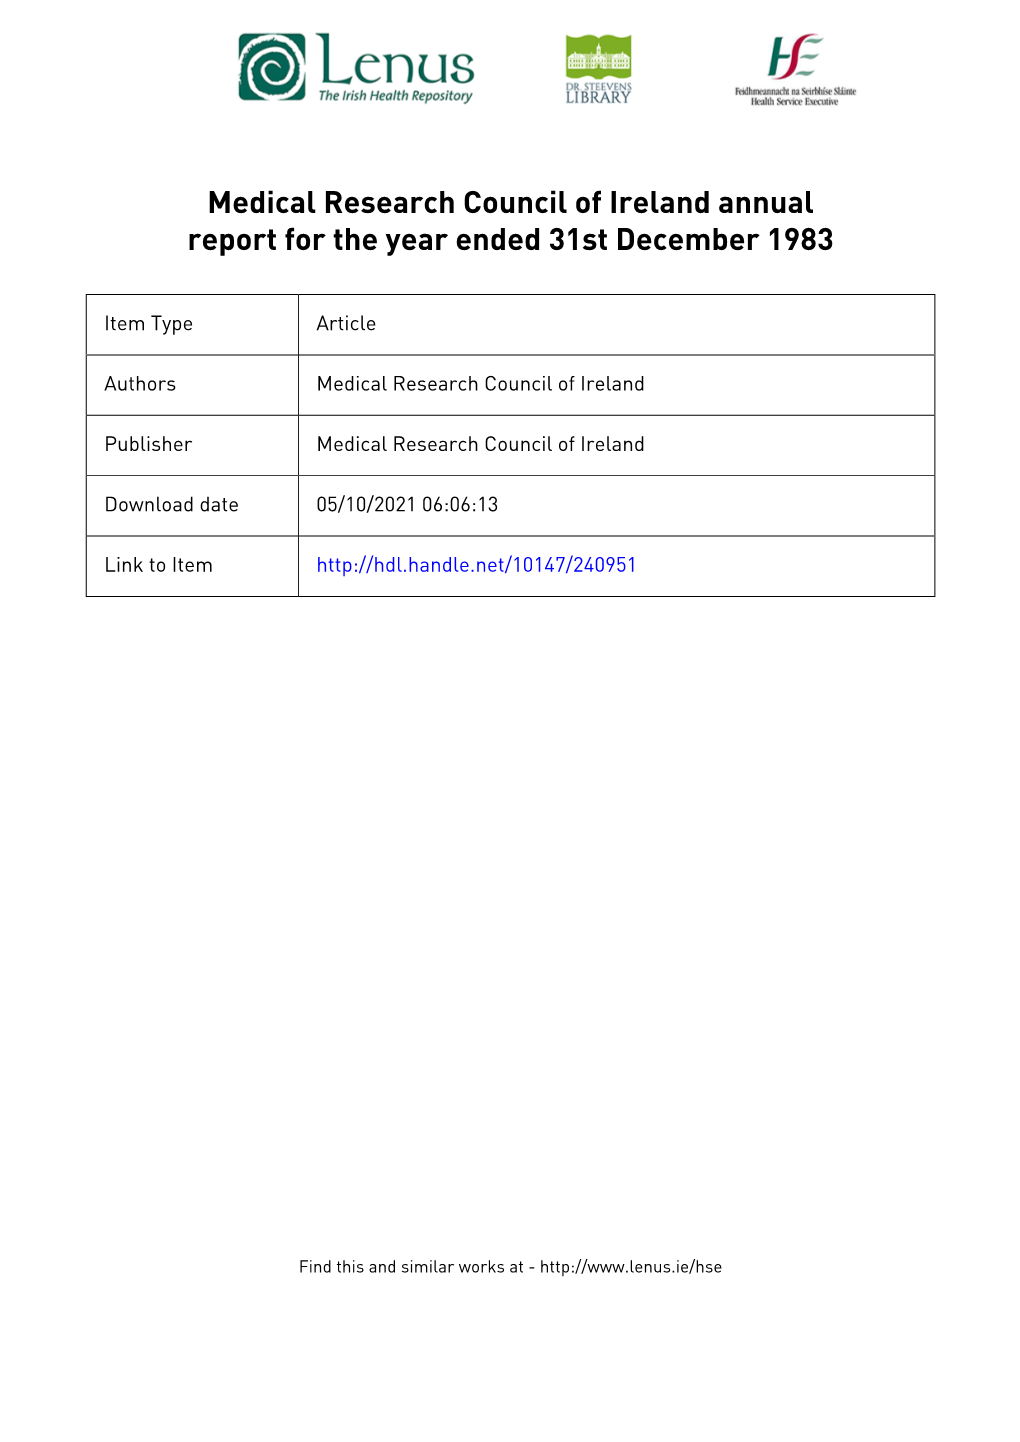 Annual Report for the Year Ended 31St December 1983